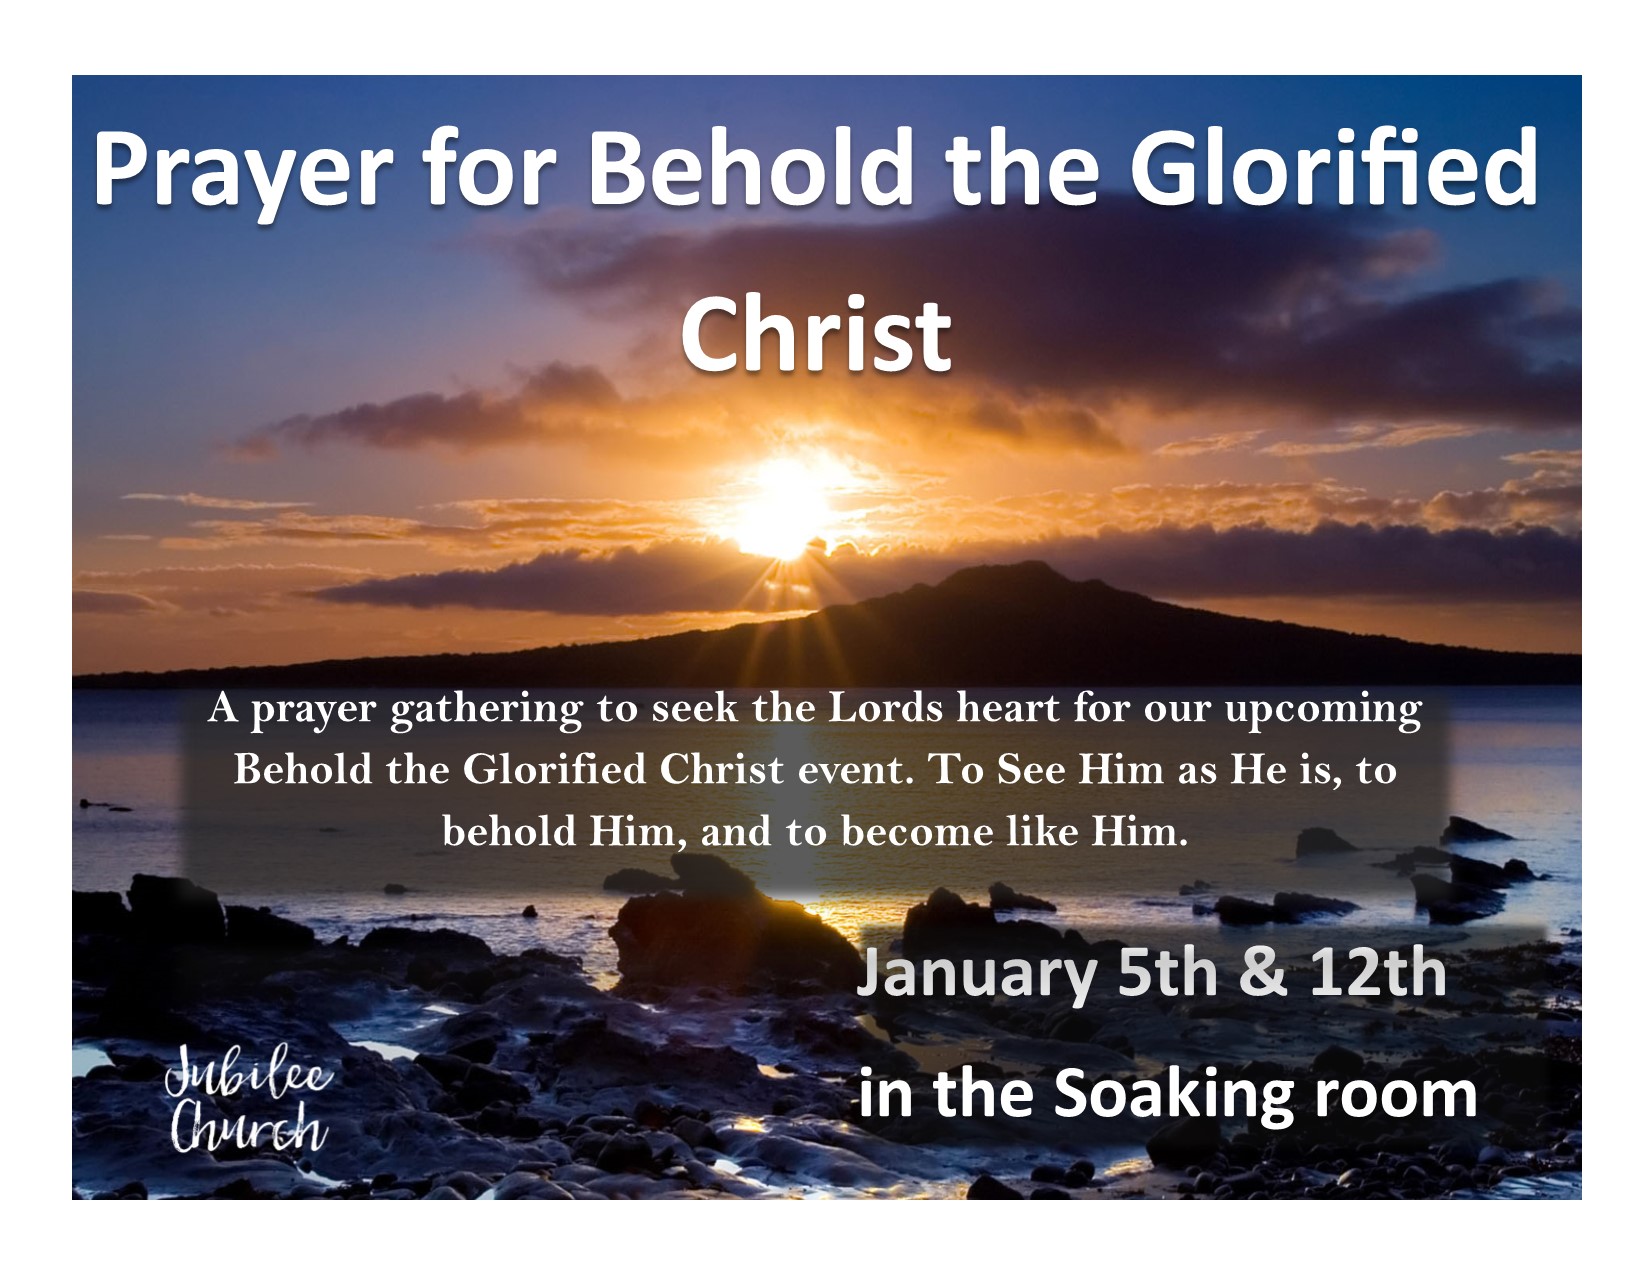 Prayer for Behold the Glorified Christ